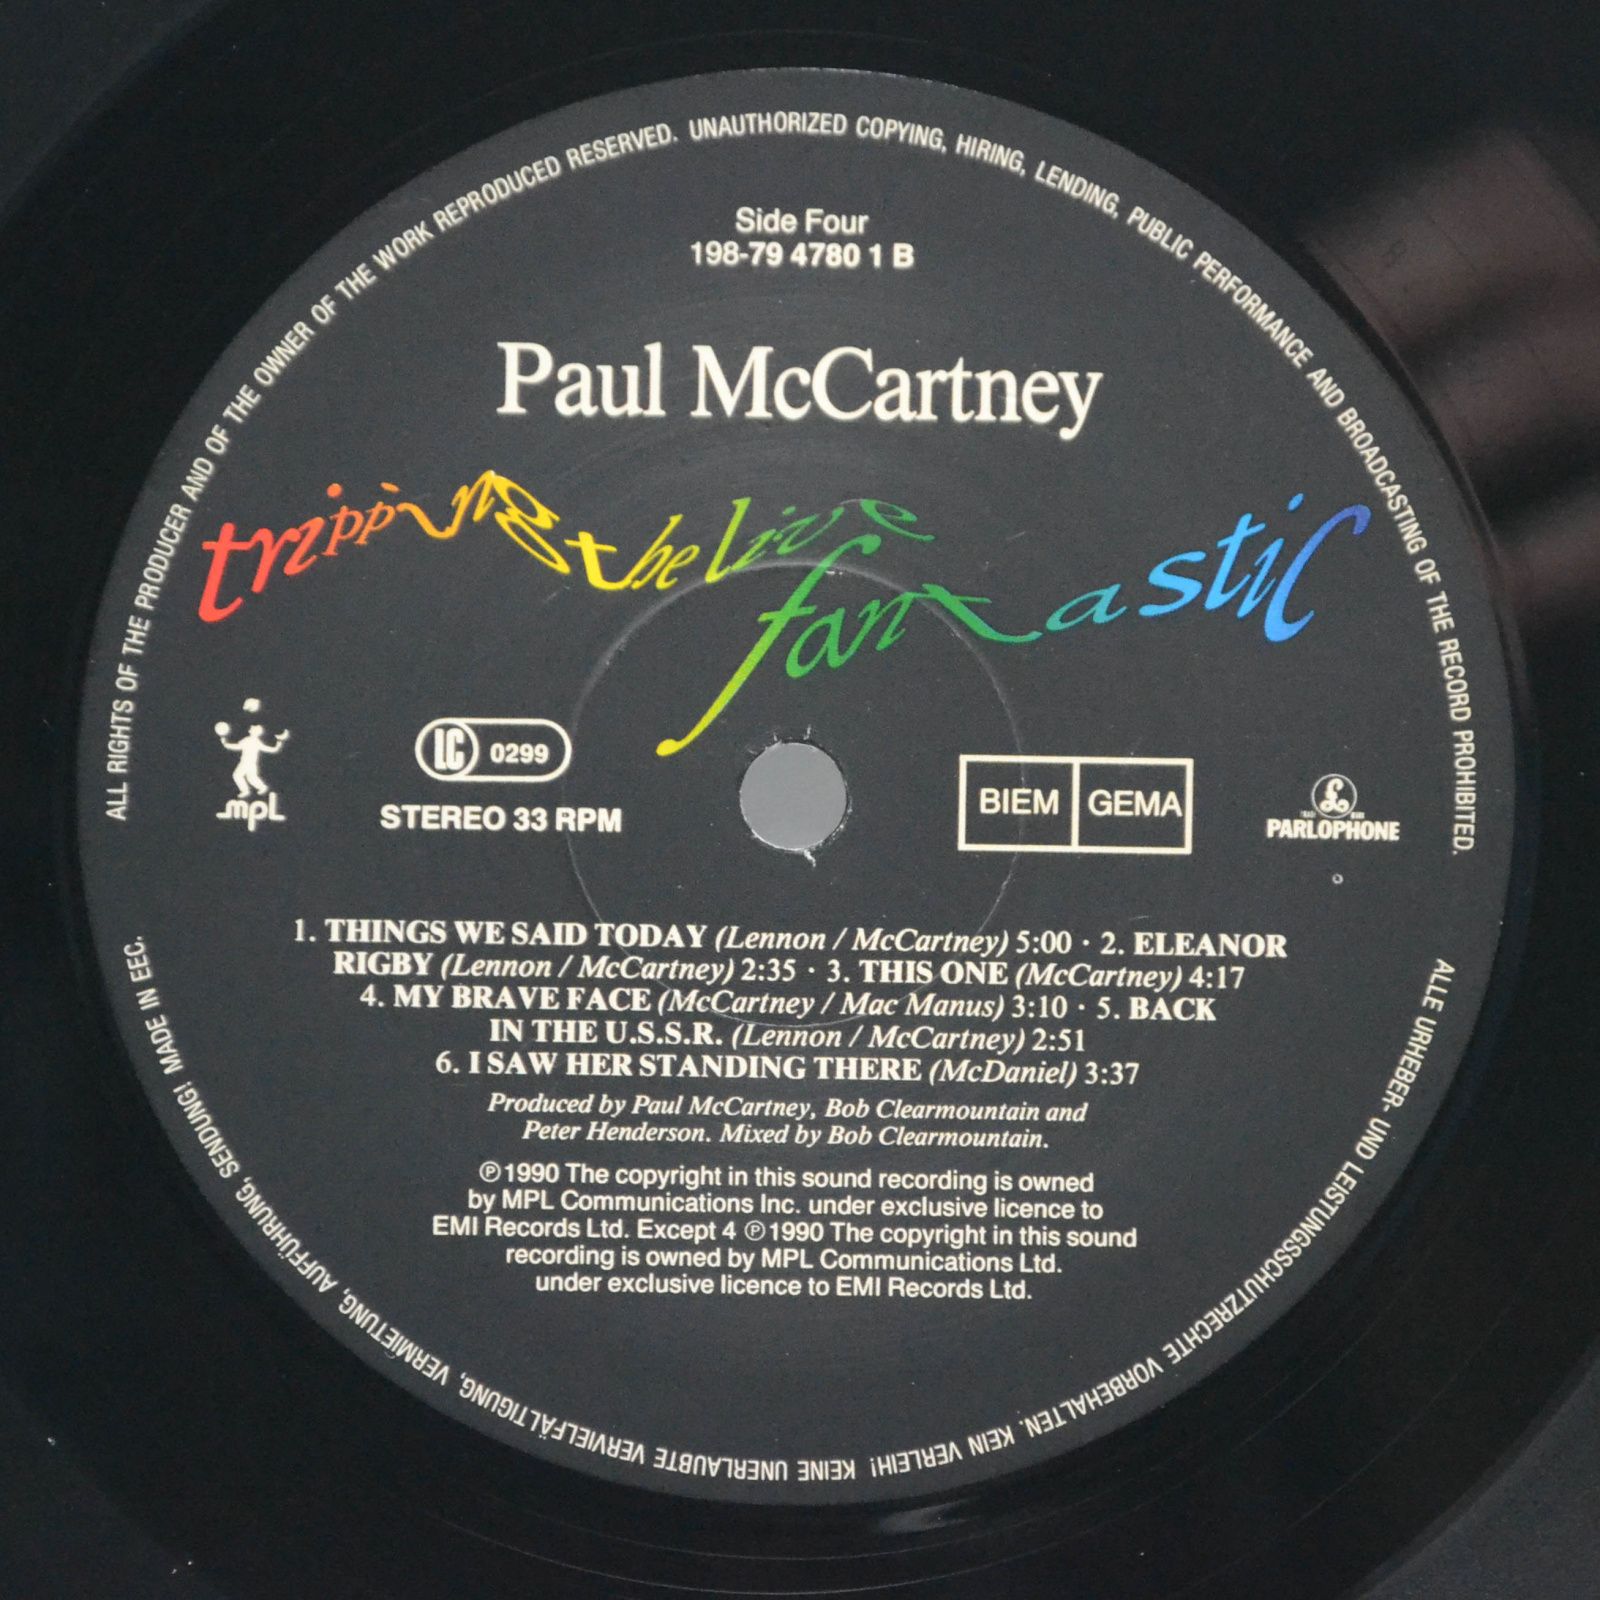 Paul McCartney — Tripping The Live Fantastic (3LP, booklet), 1990